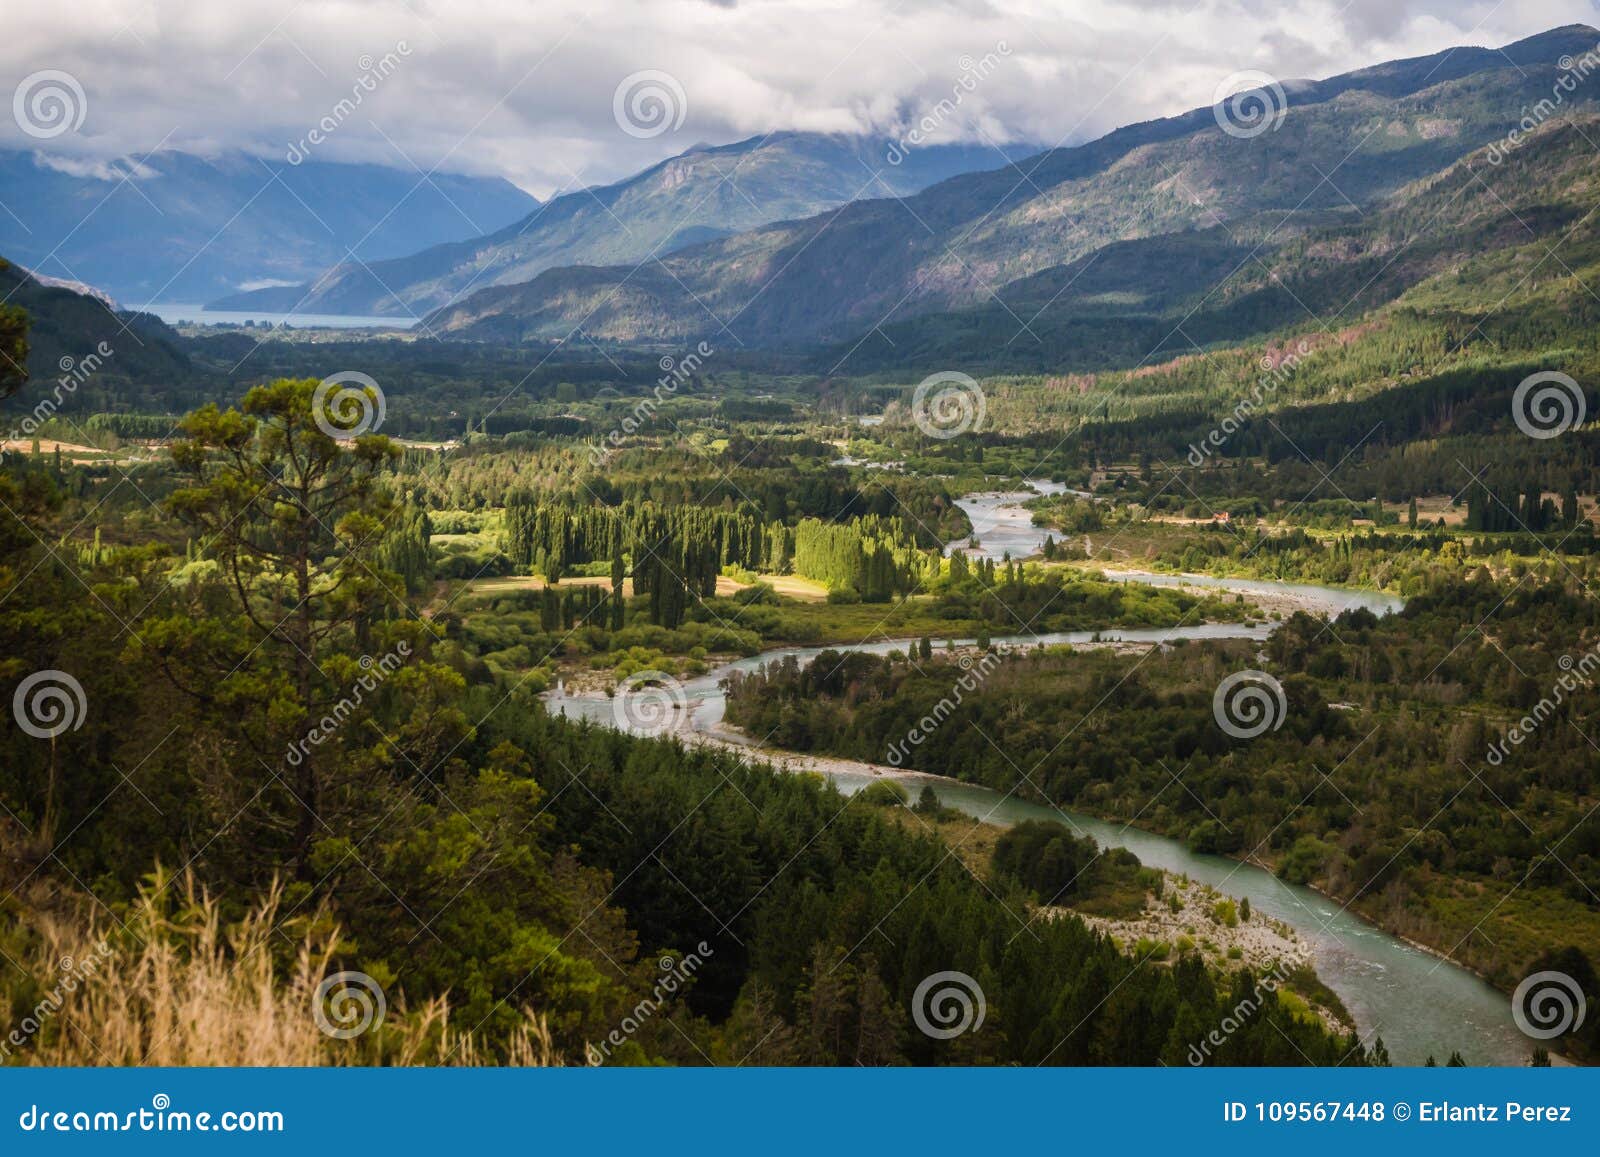 landscape of blue river, valley and forest in el bolson